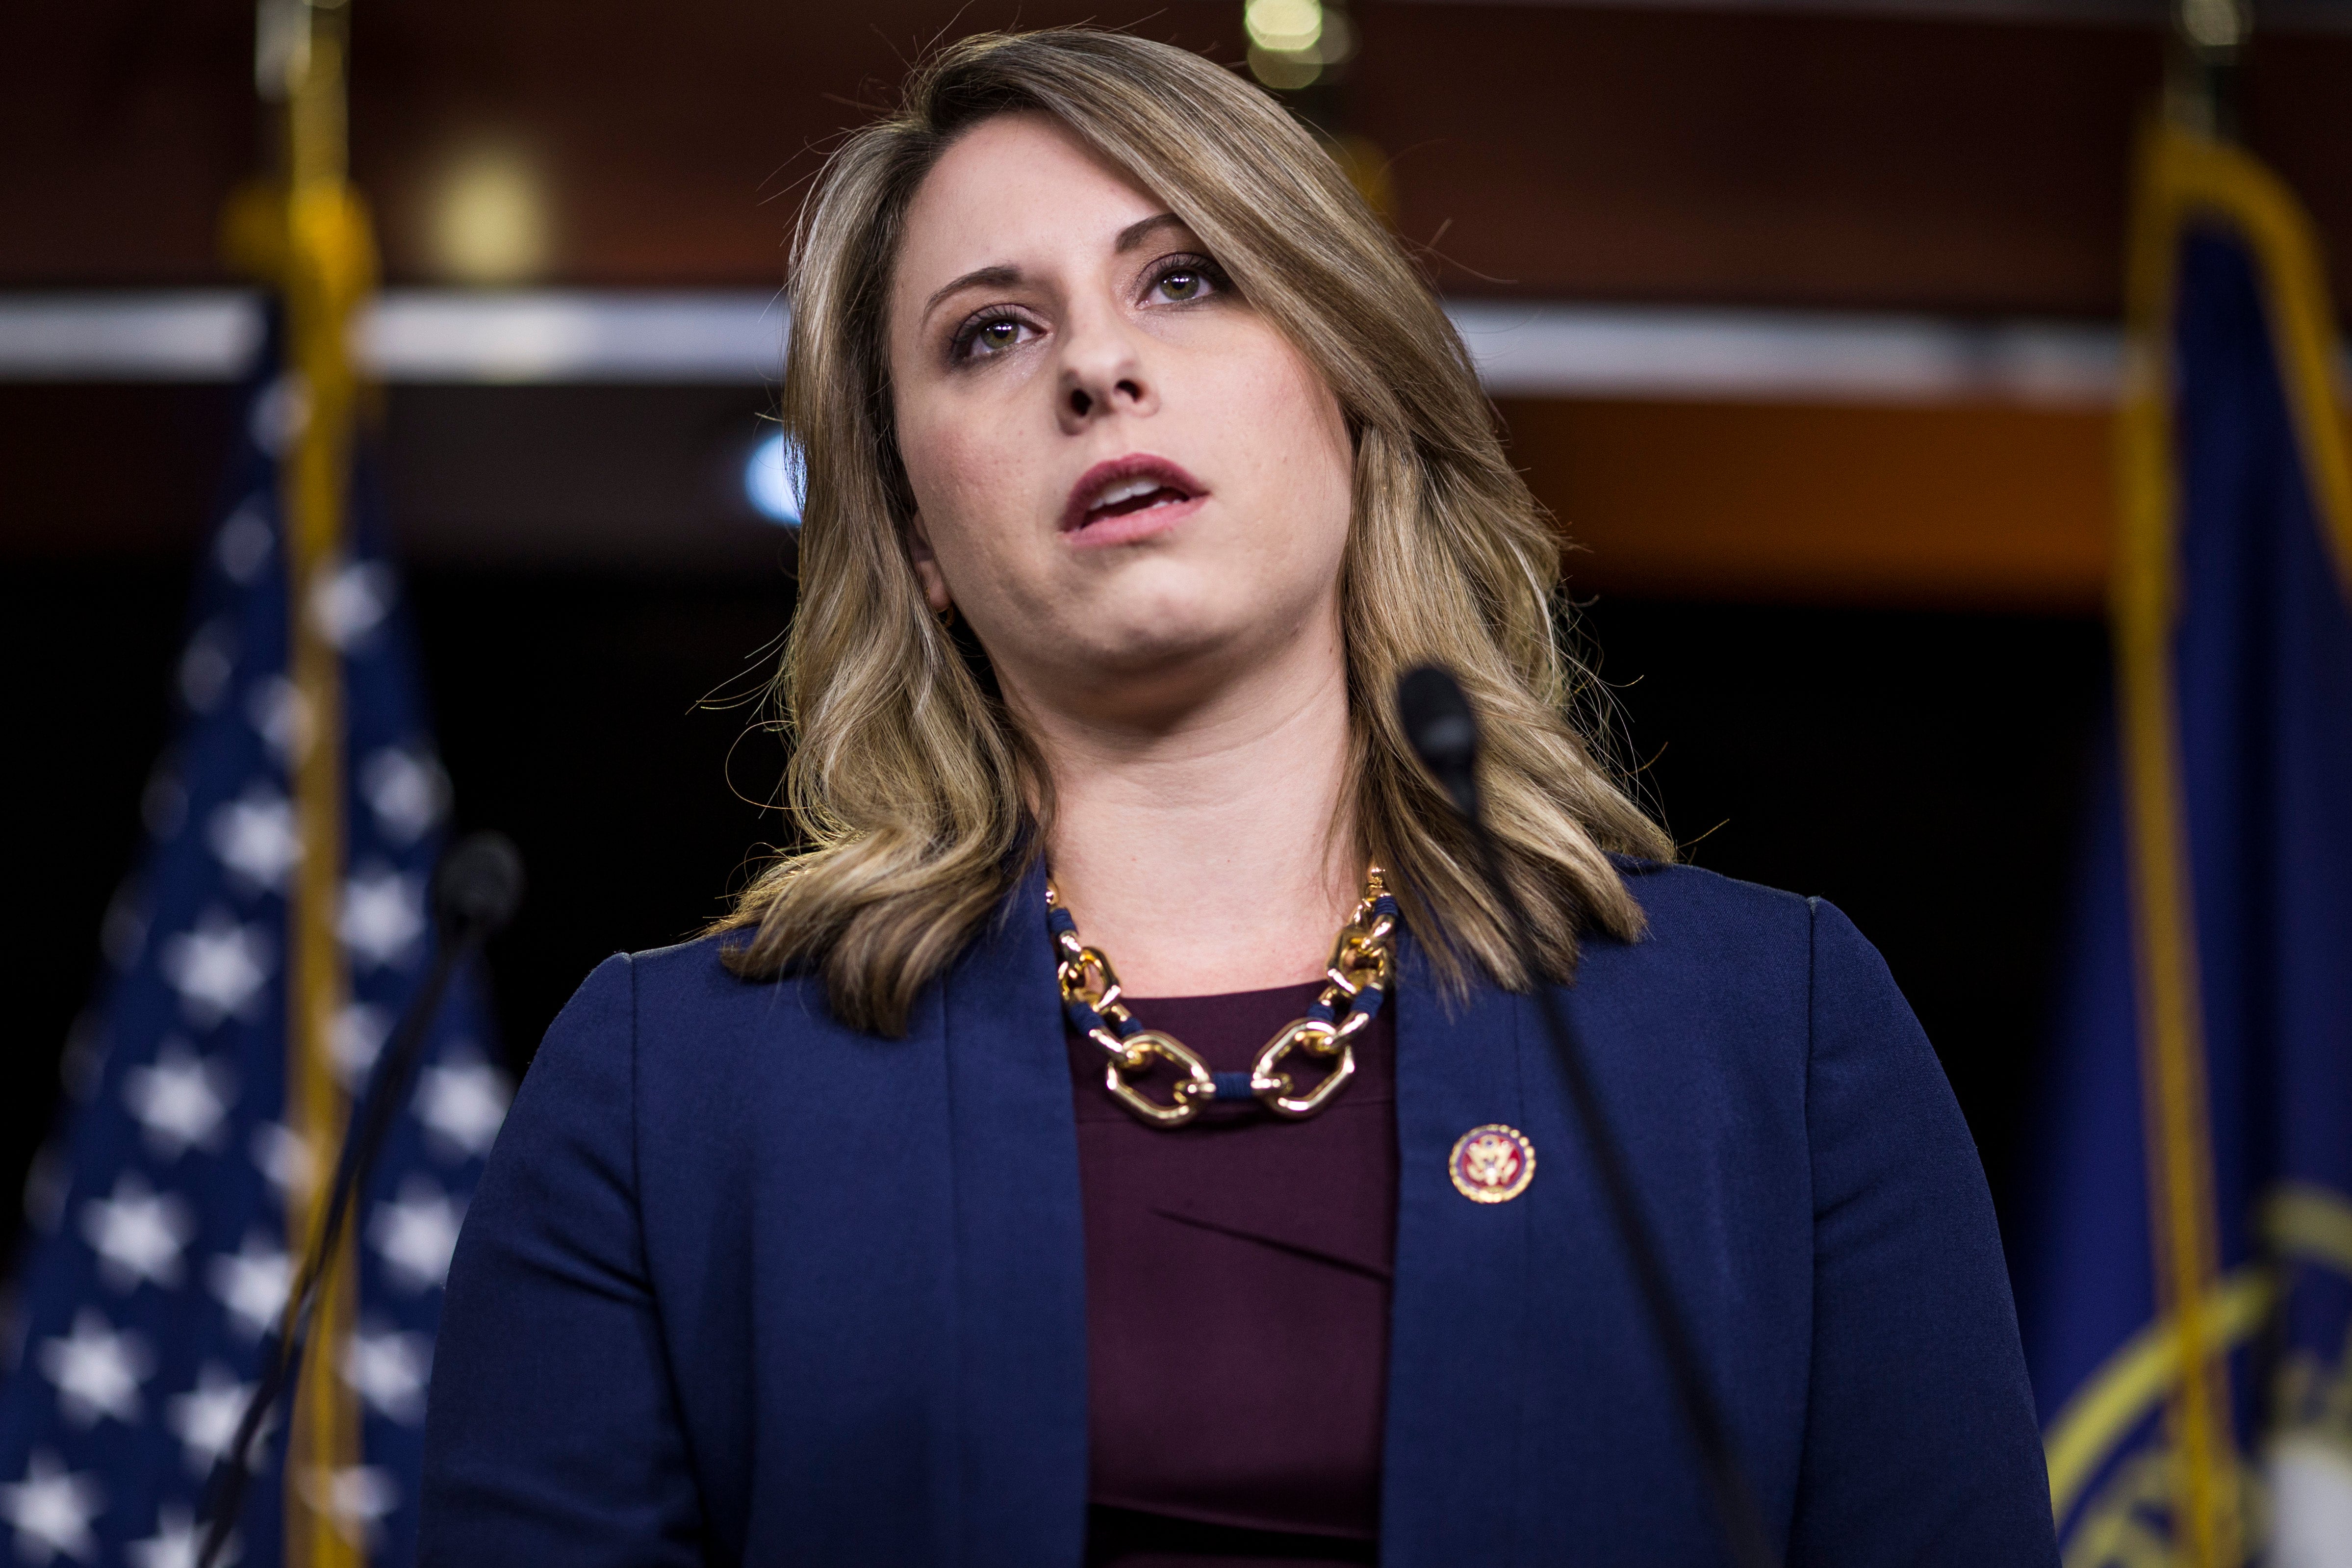 Former Rep. Katie Hill has been ordered to pay more than $100,000 to the Daily Mail in attorneys’ fees